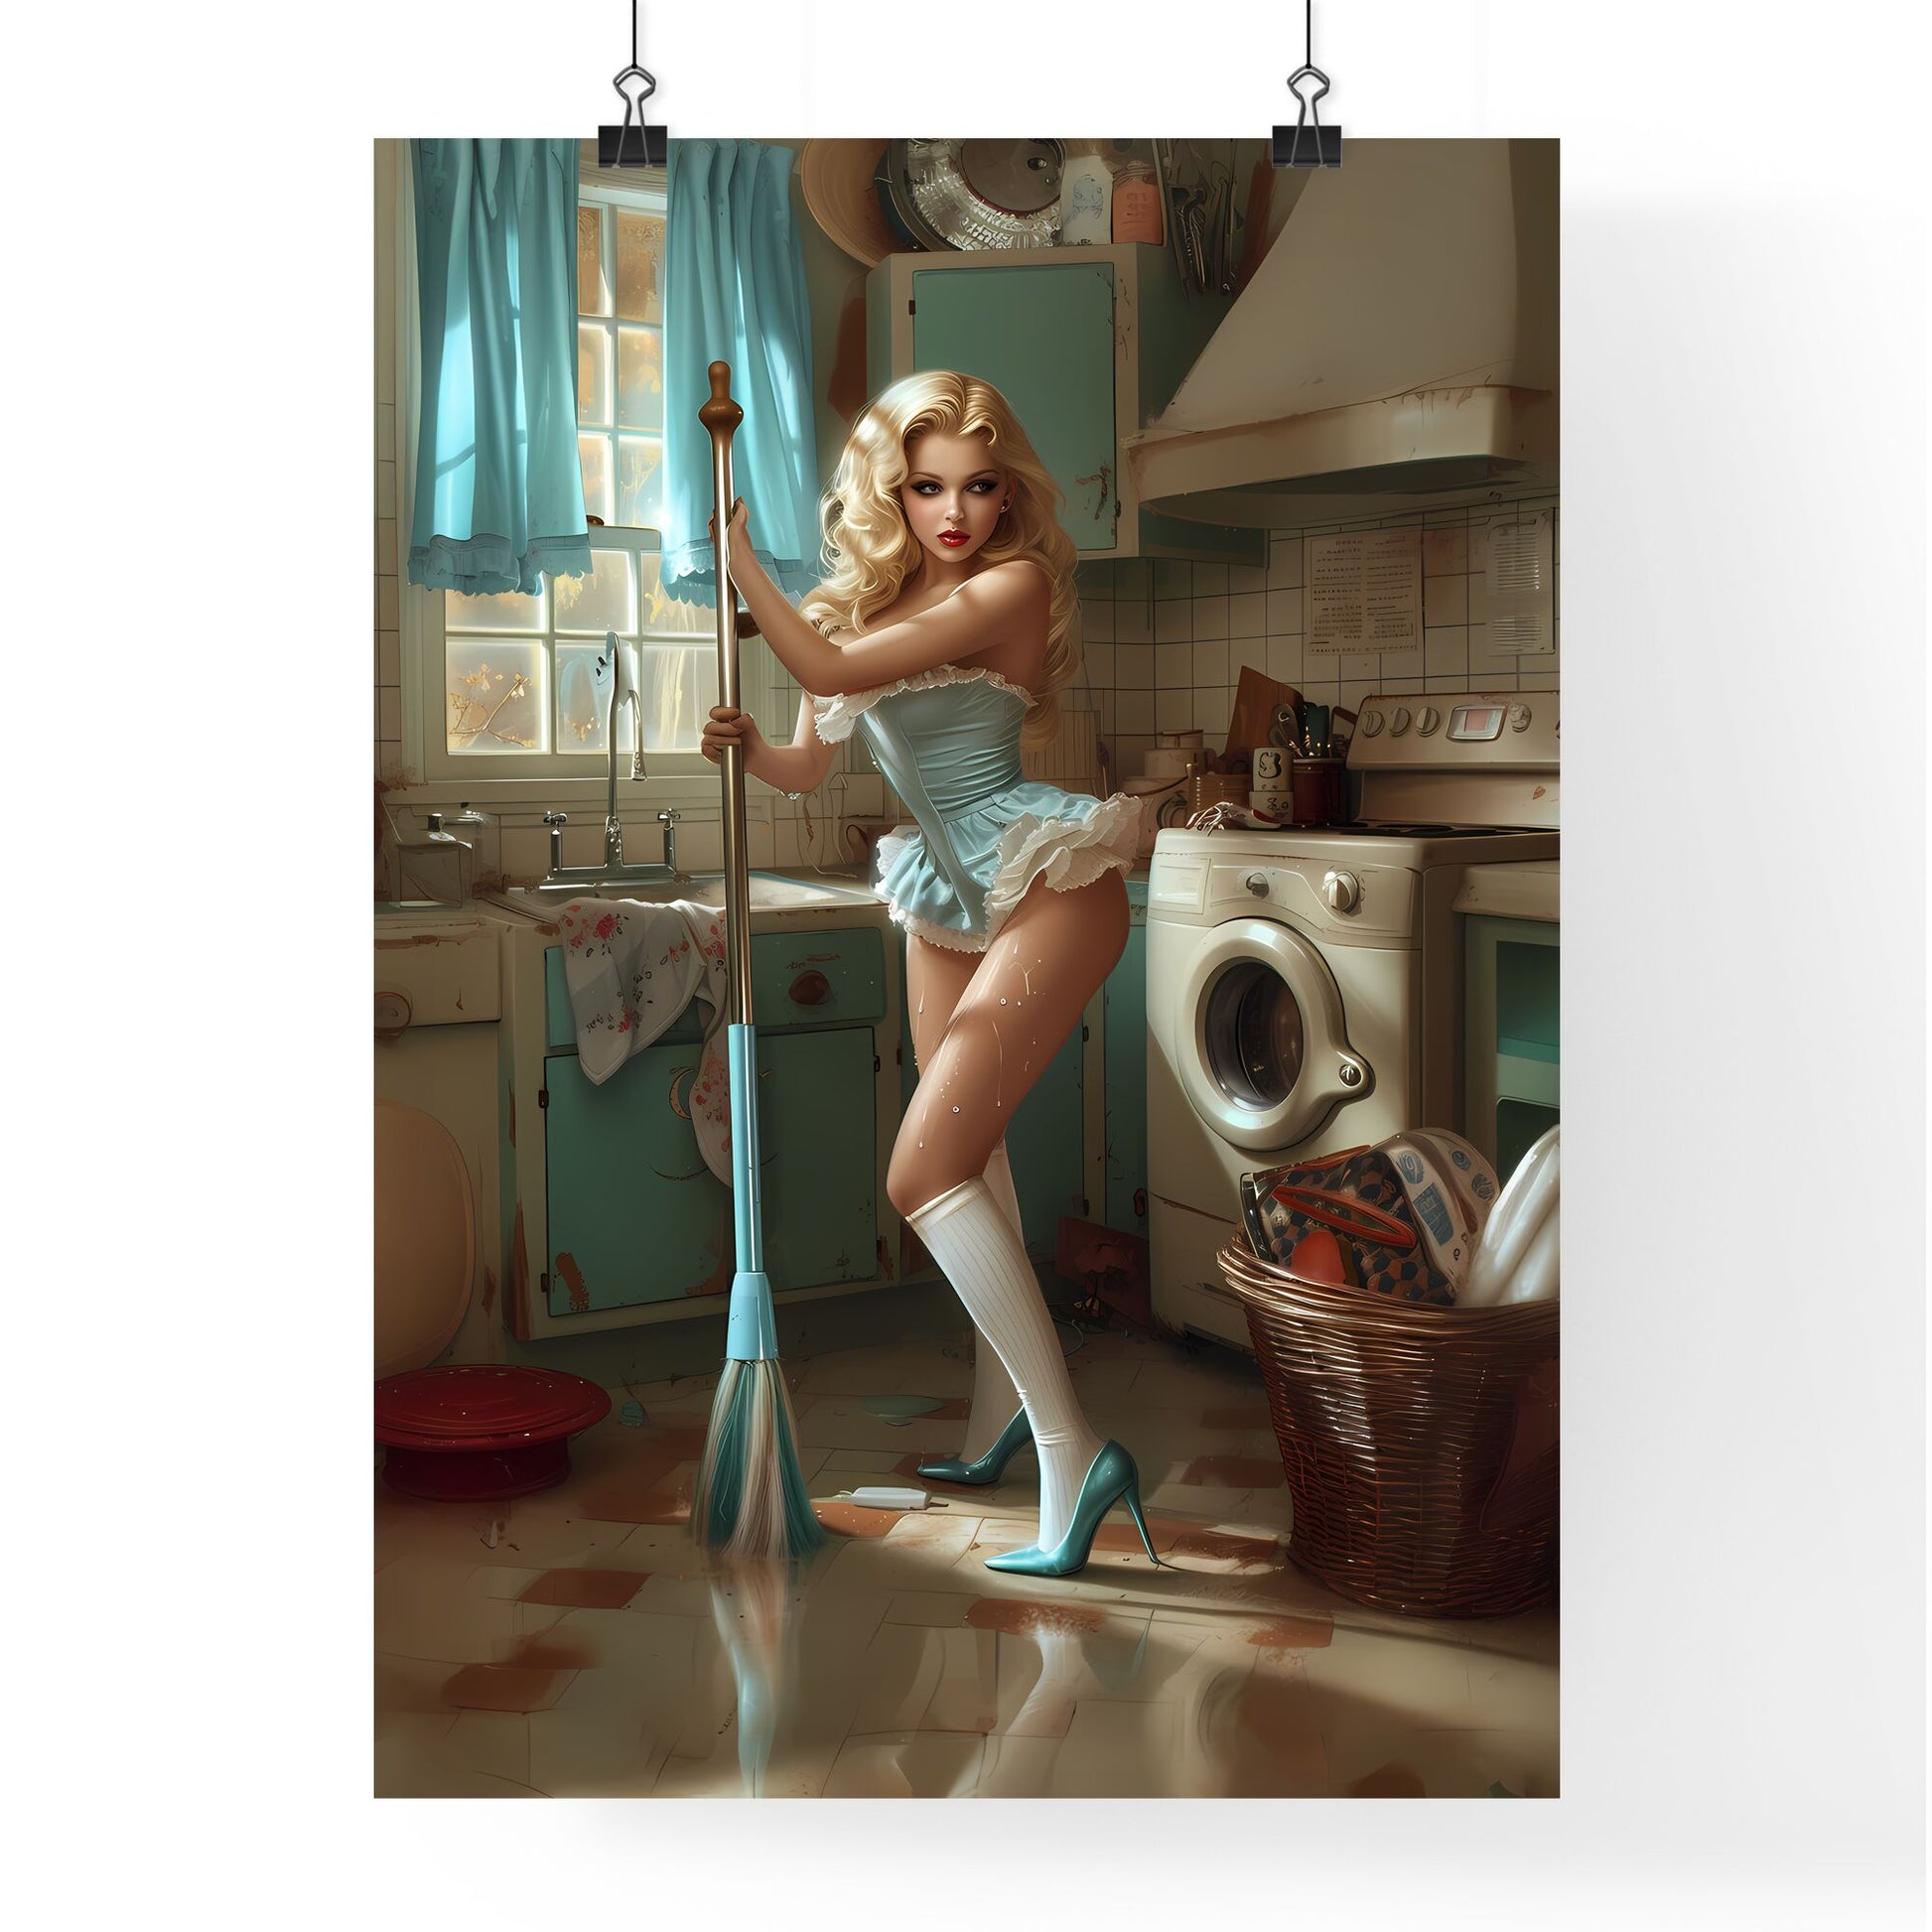 Housewife - Art print of a woman in a kitchen holding a broom Default Title